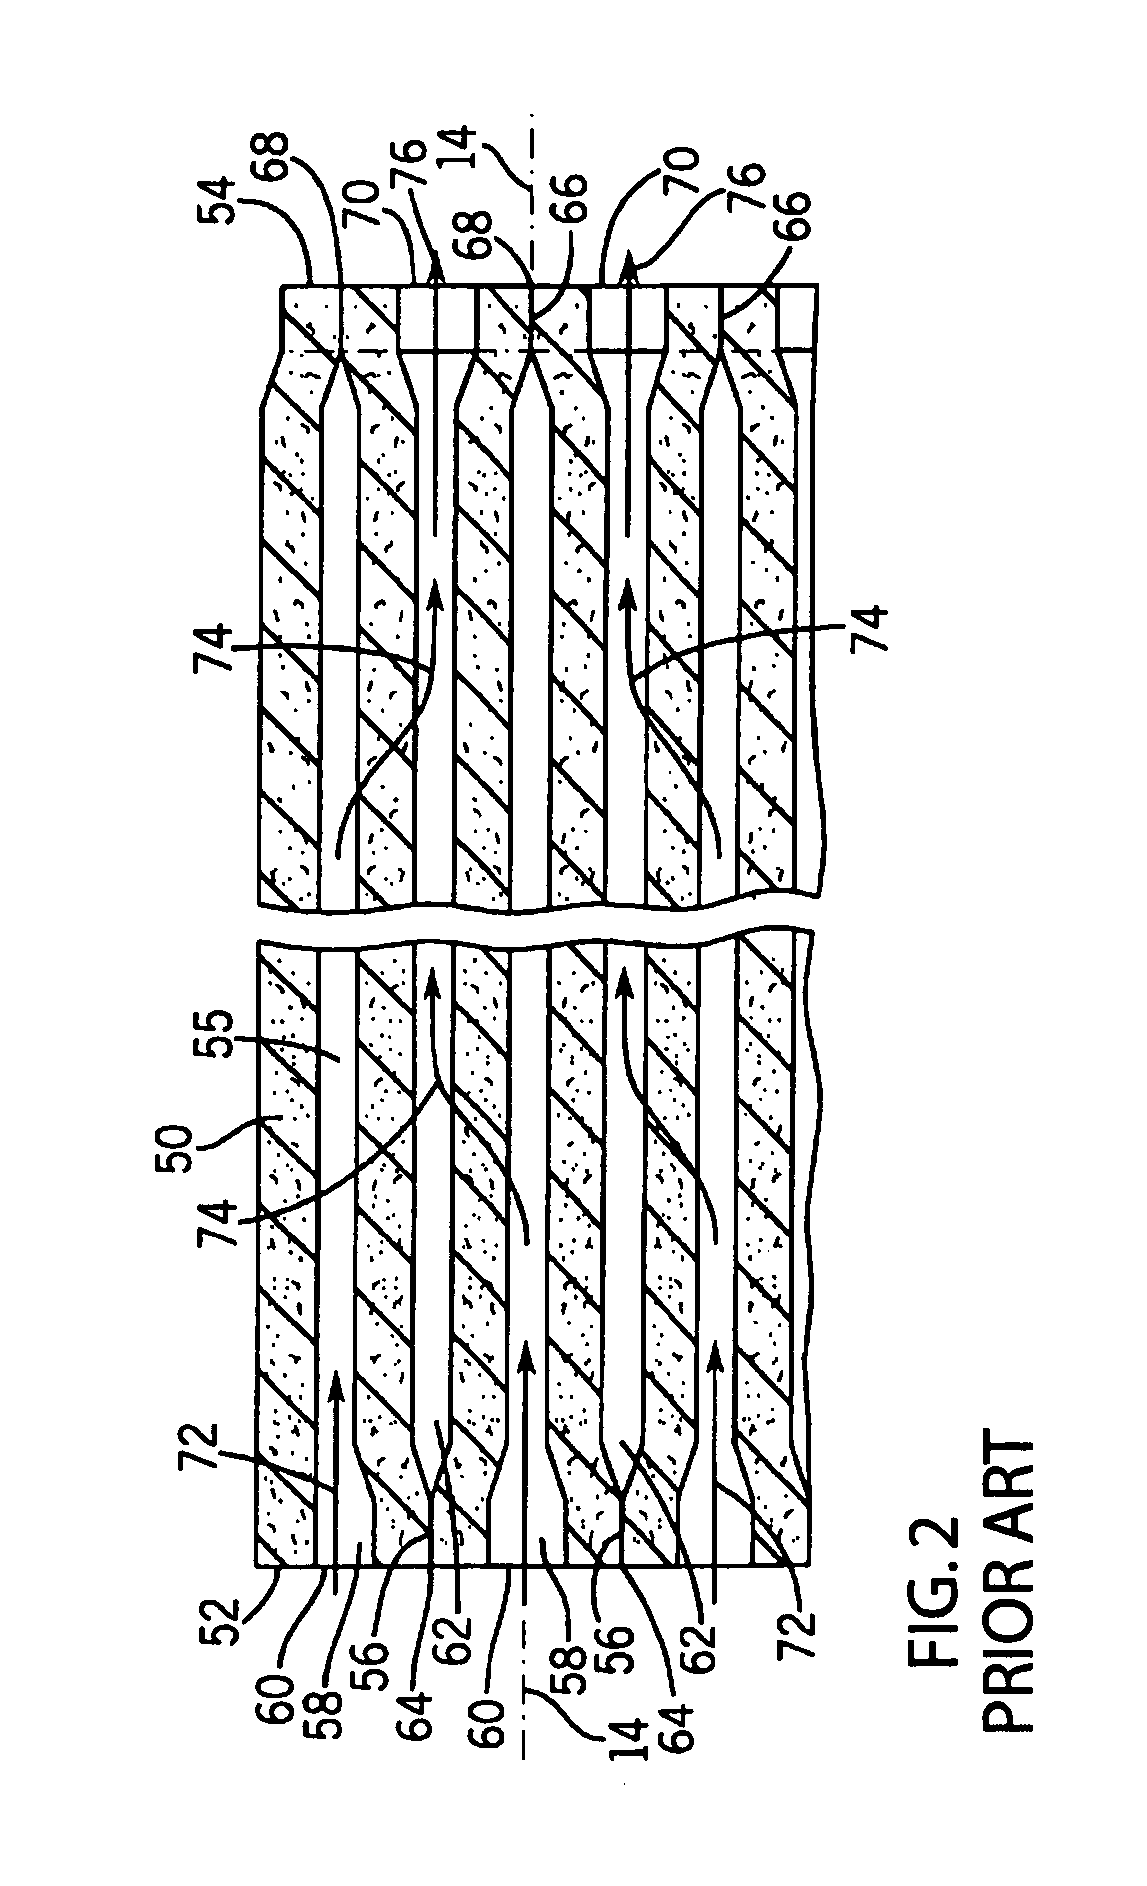 High capacity direct flow filter with maintained channel width